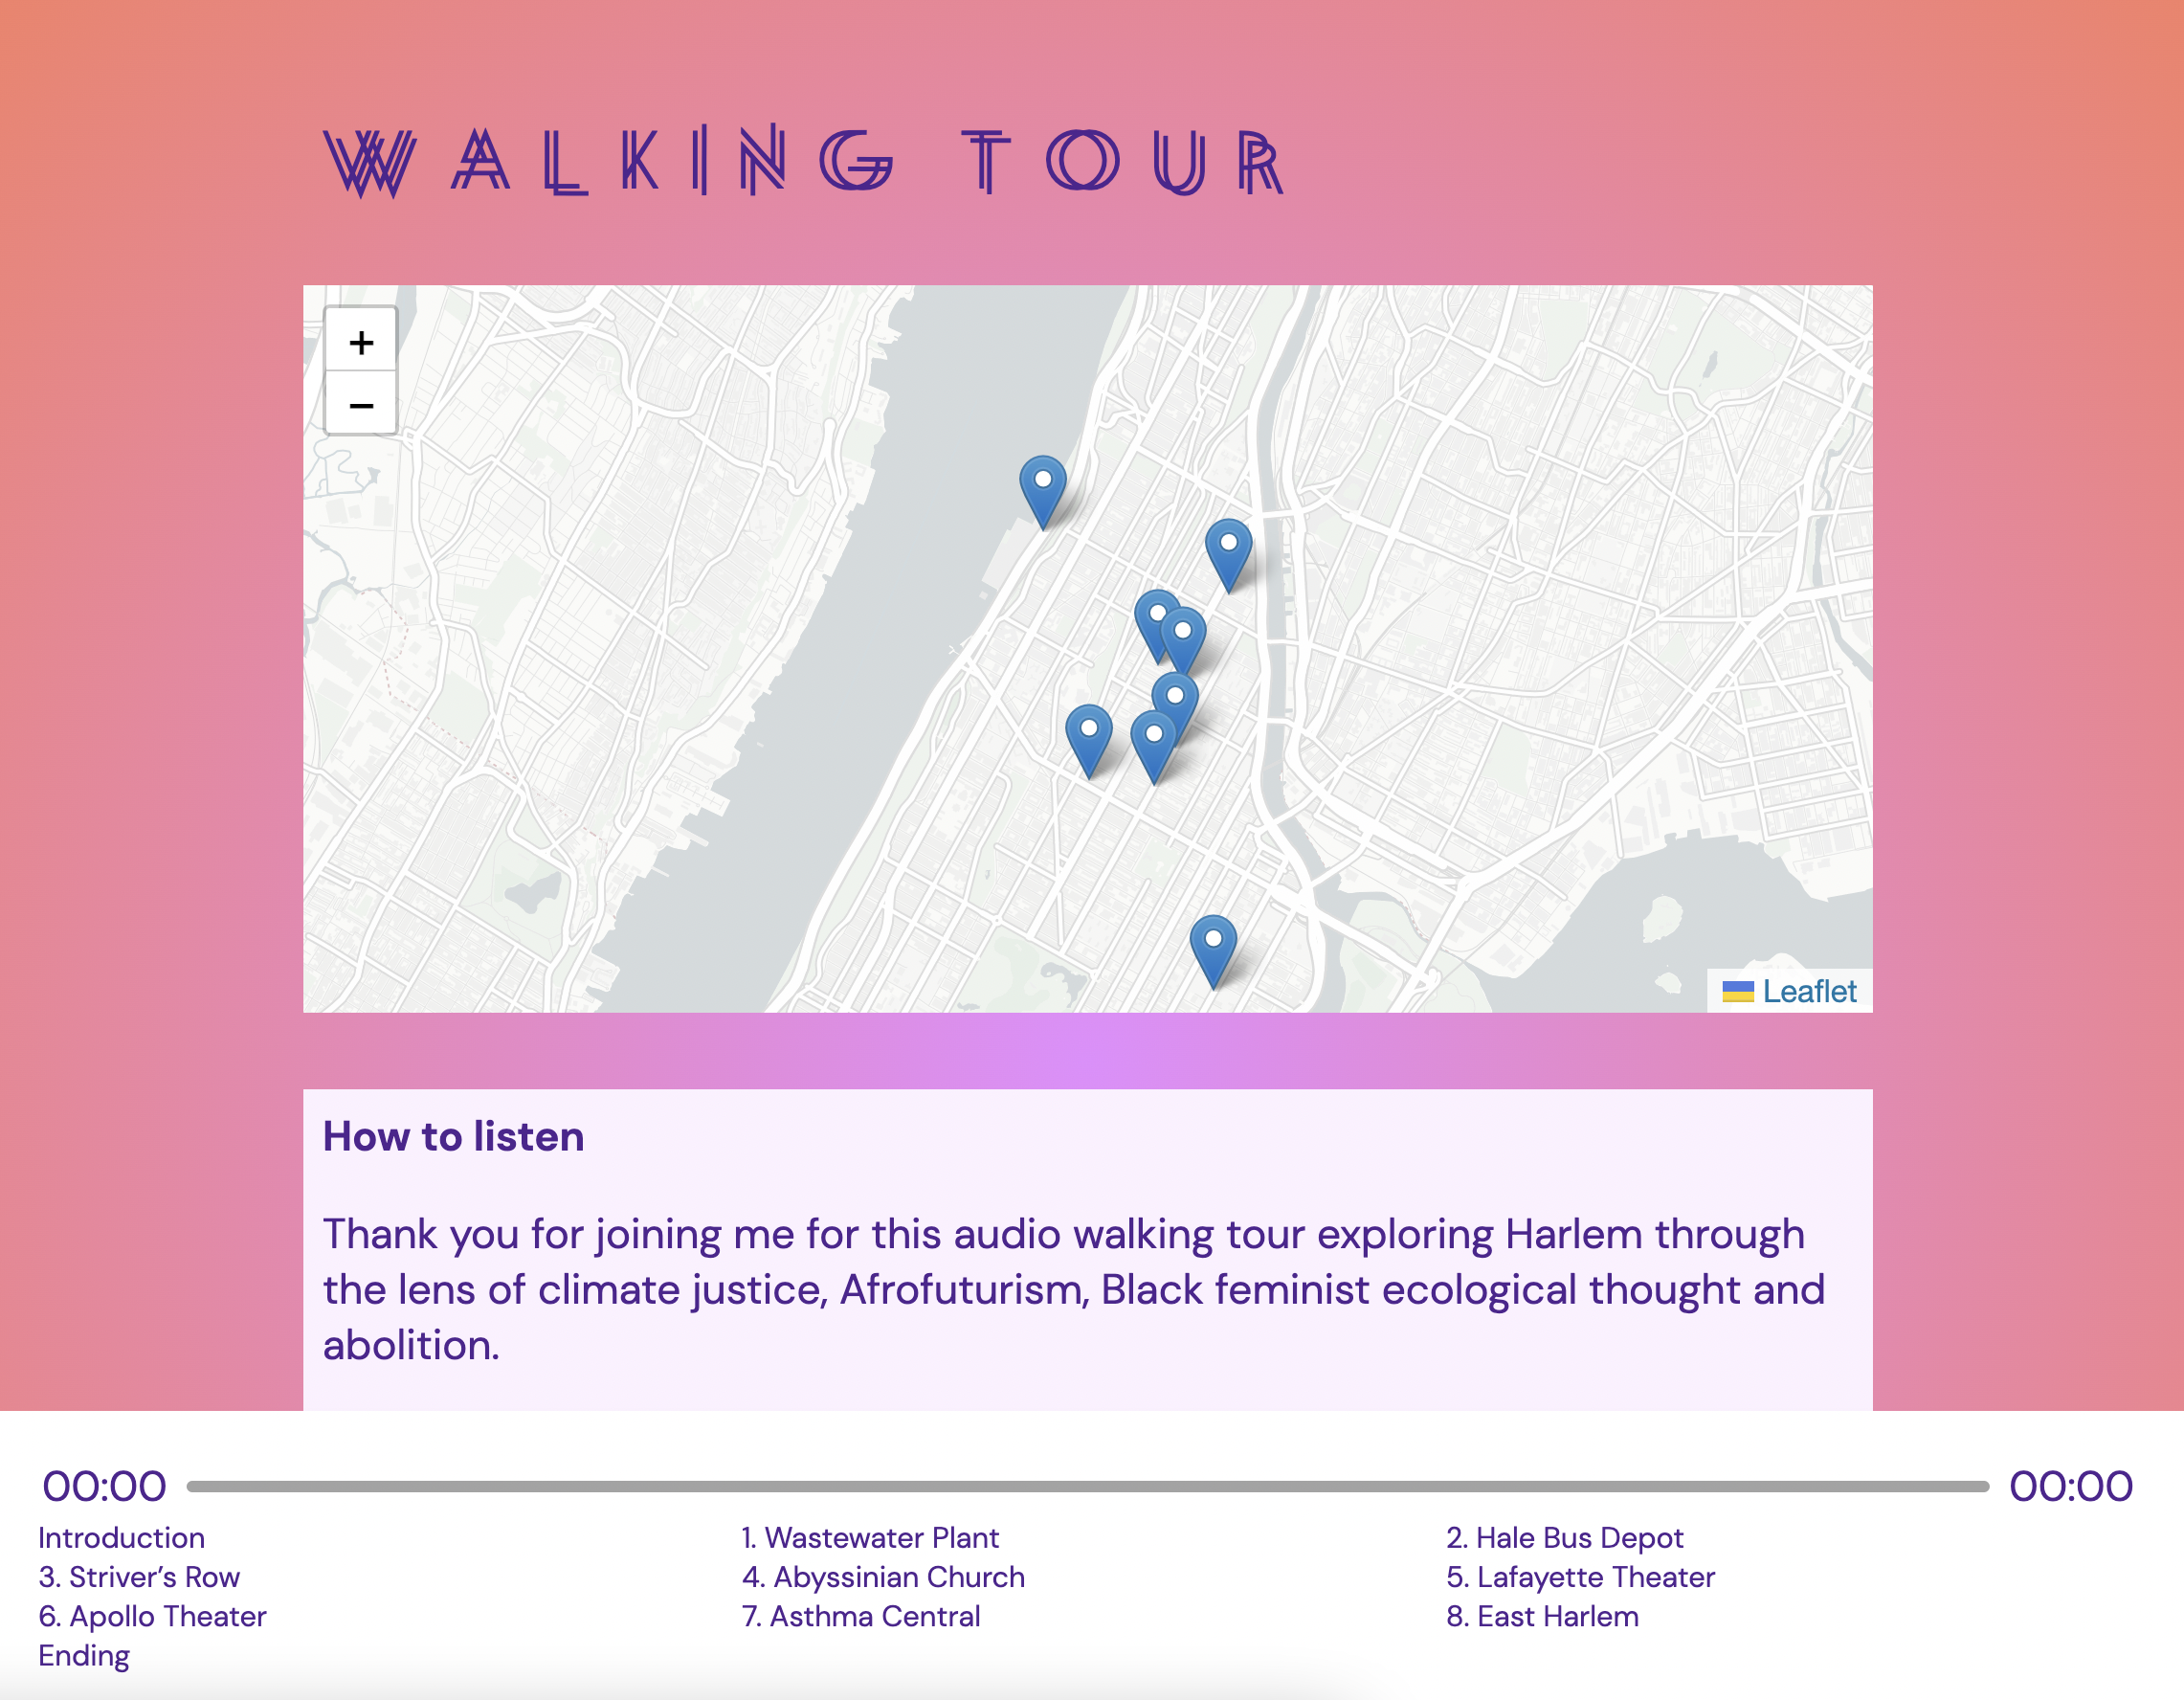 a screenshot of the Walking Tour. Main text reads: "How to listen Thank you for joining me for this audio walking tour exploring Harlem through the lens of climate justice, Afrofuturism, Black feminist ecological thought and abolition."